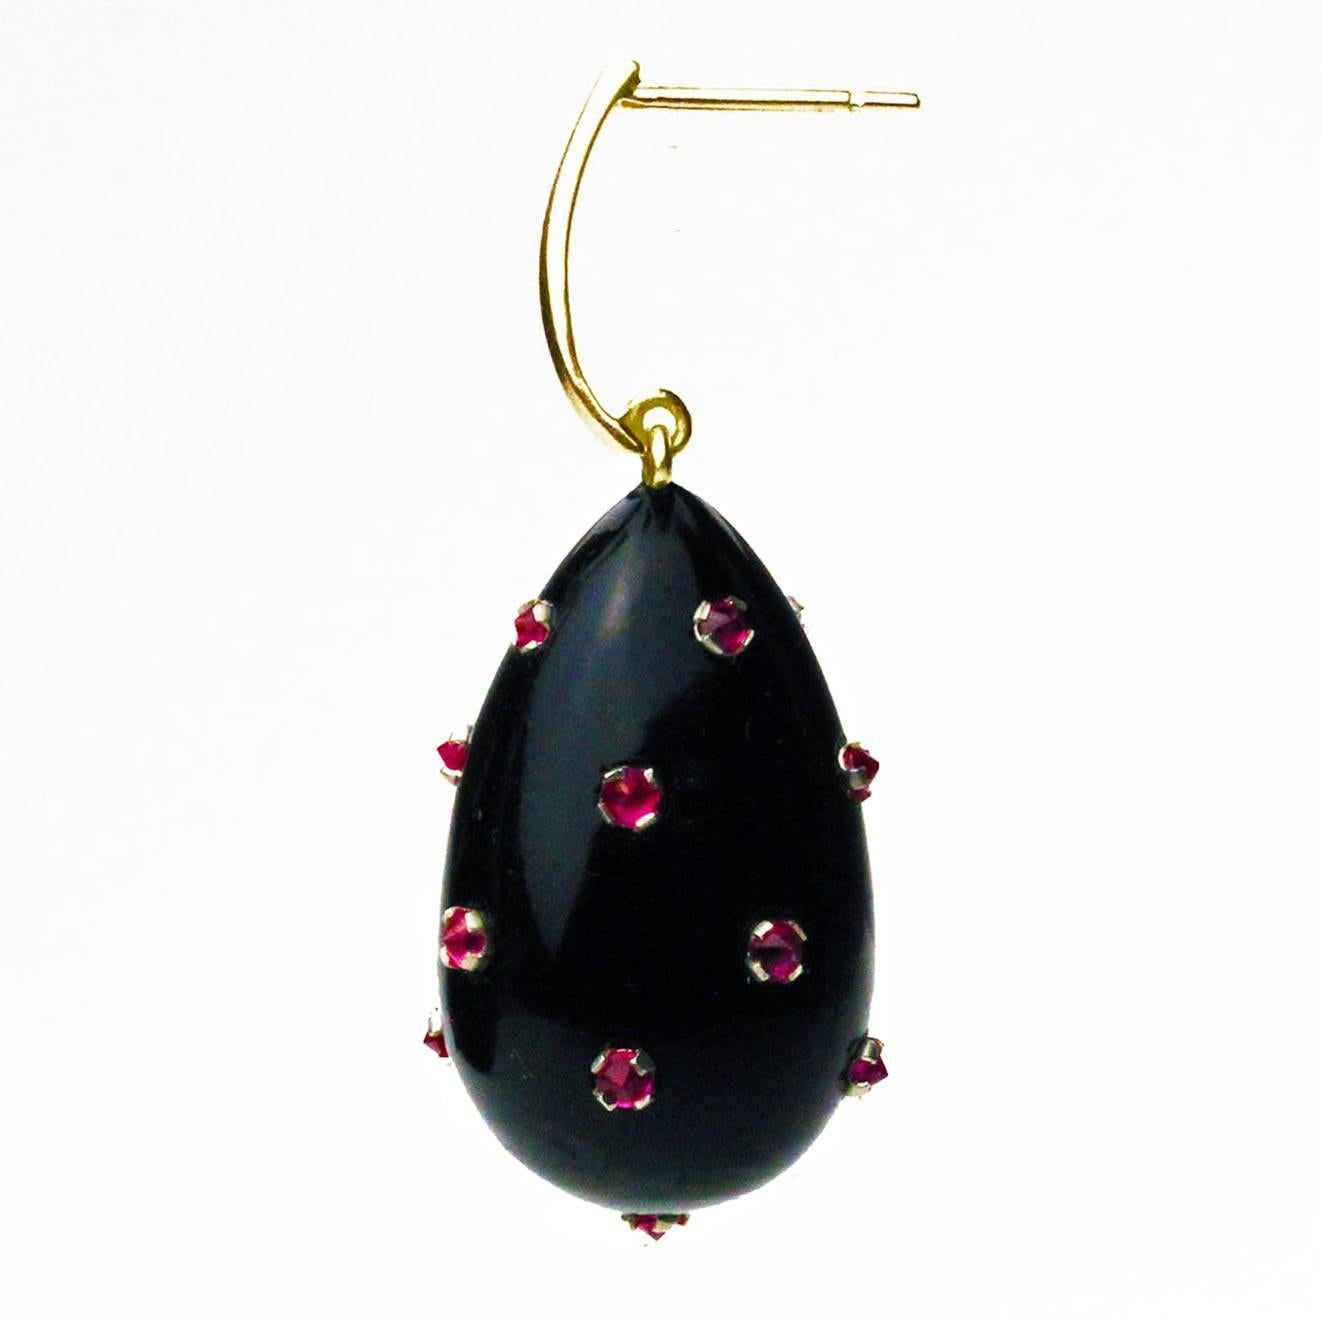 These elegant earrings are inspired by renaissance jewelry. Each earring is a black jade drop incrusted with rubies.  They are light and easy to wear, as well as being extremely versatile.  They can be worn to work and then for an evening out on the